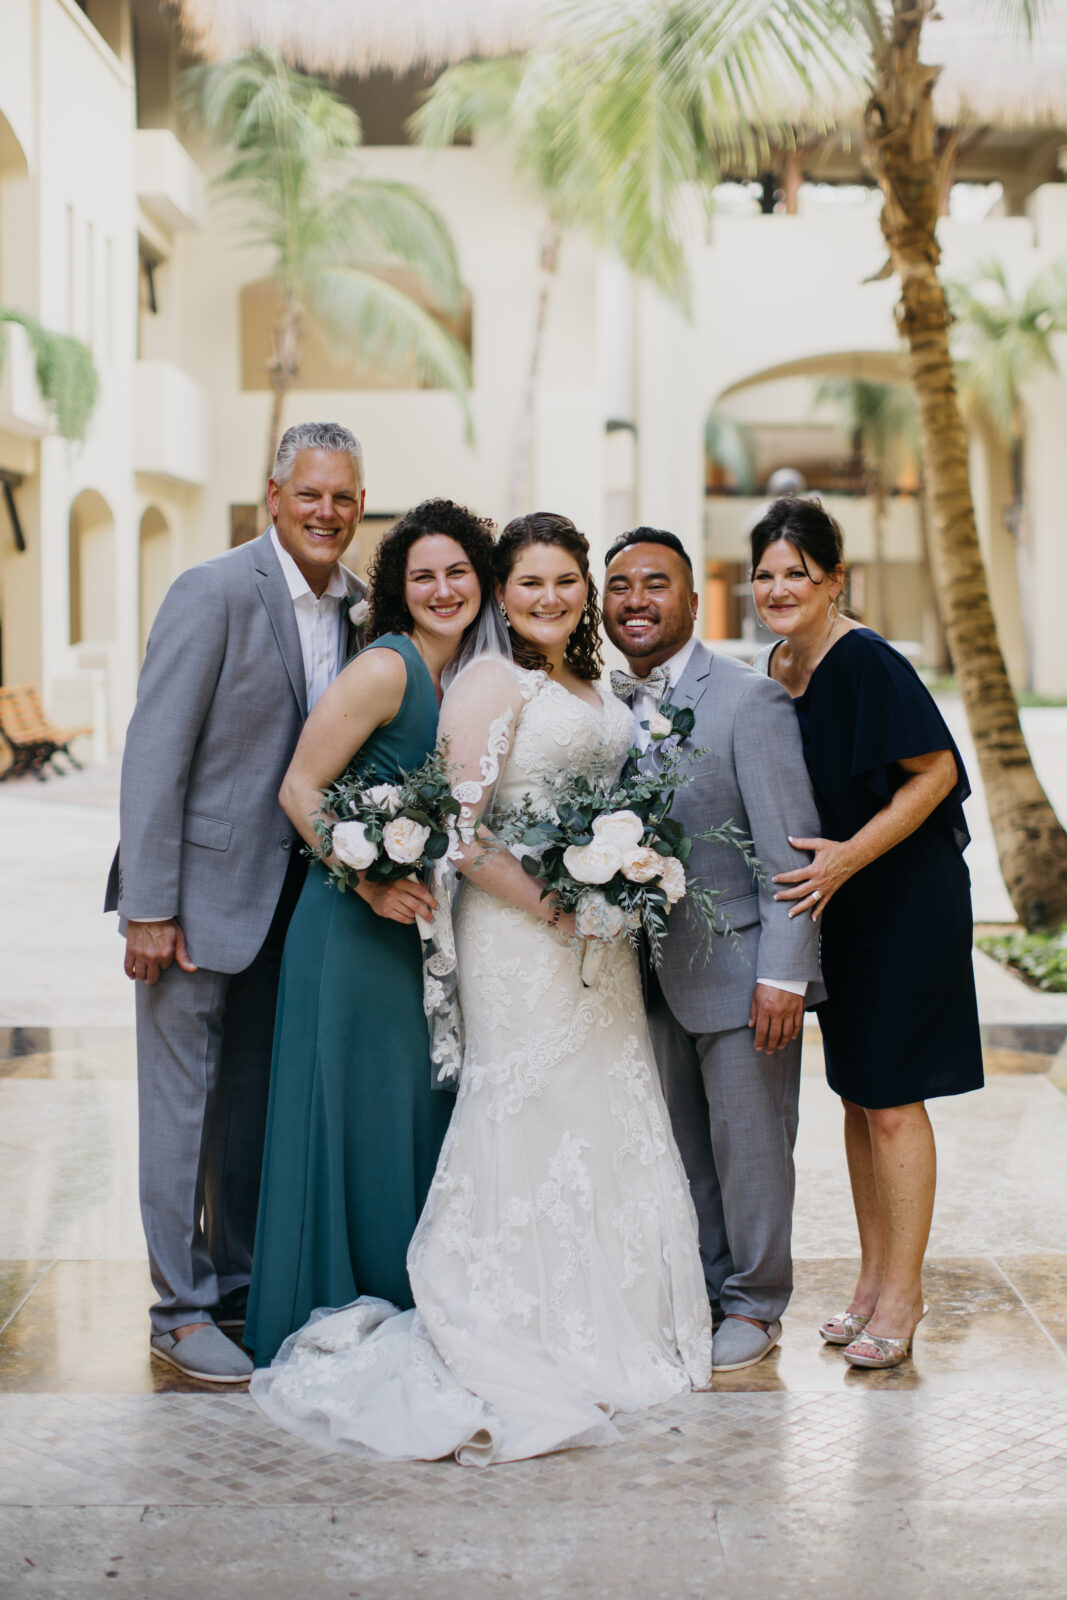 A photo of the wedding couple and the bride's family